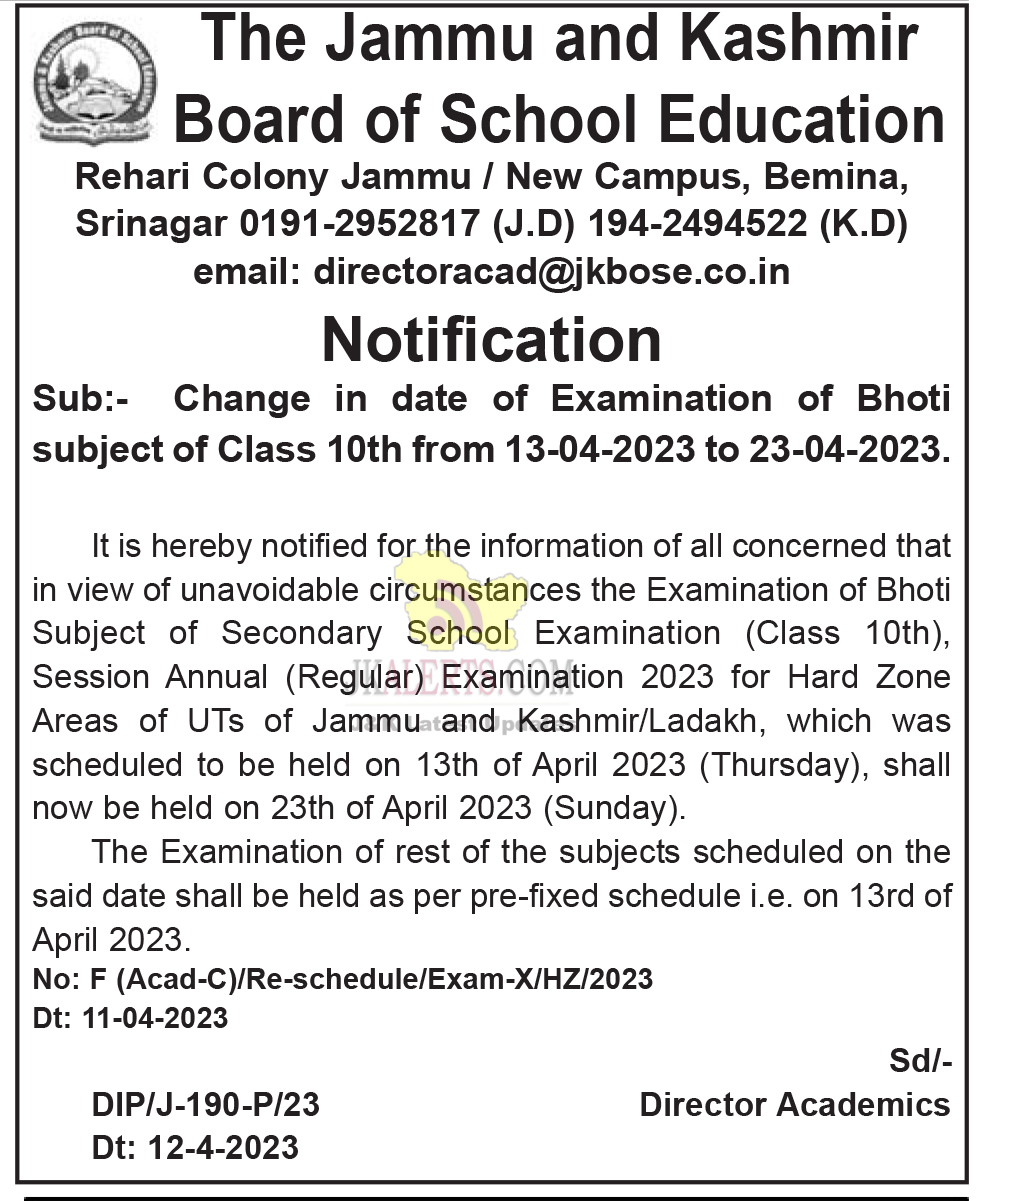 JKBOSE Notification of Change in Date of Examination Class 10th